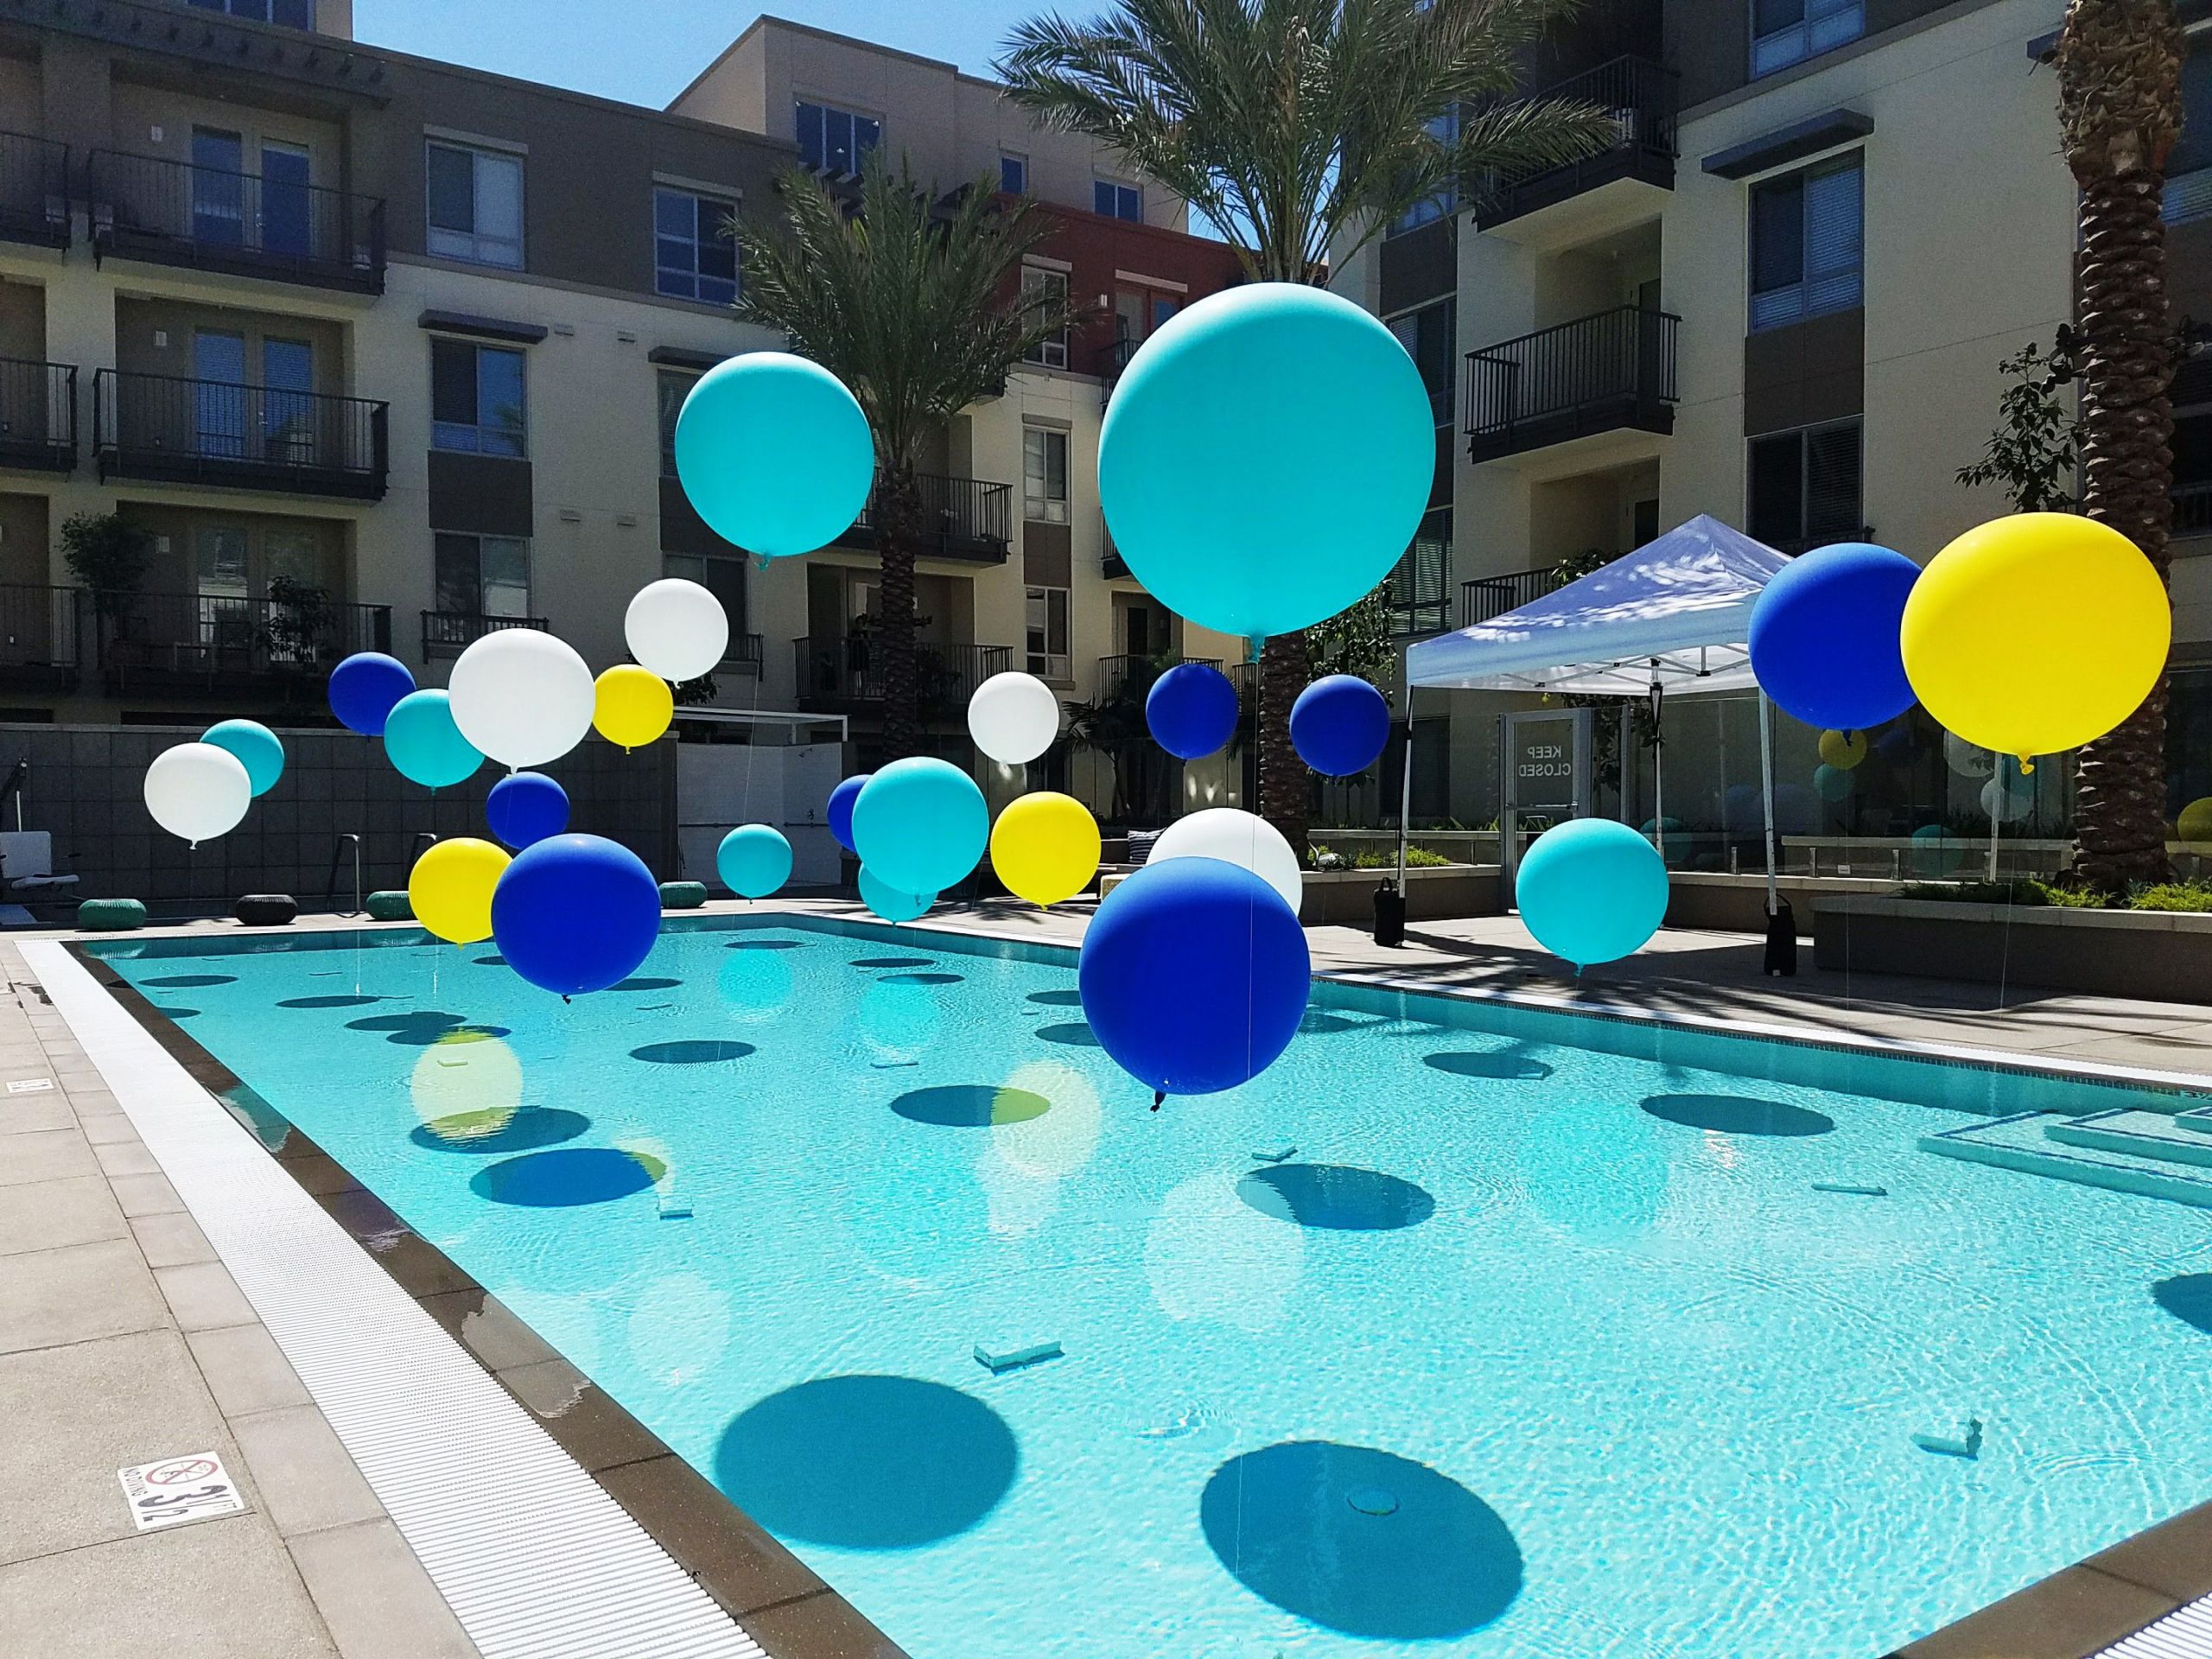 Pool Party Ideas For Boys
 Pool balloons summer party pool party party ideas